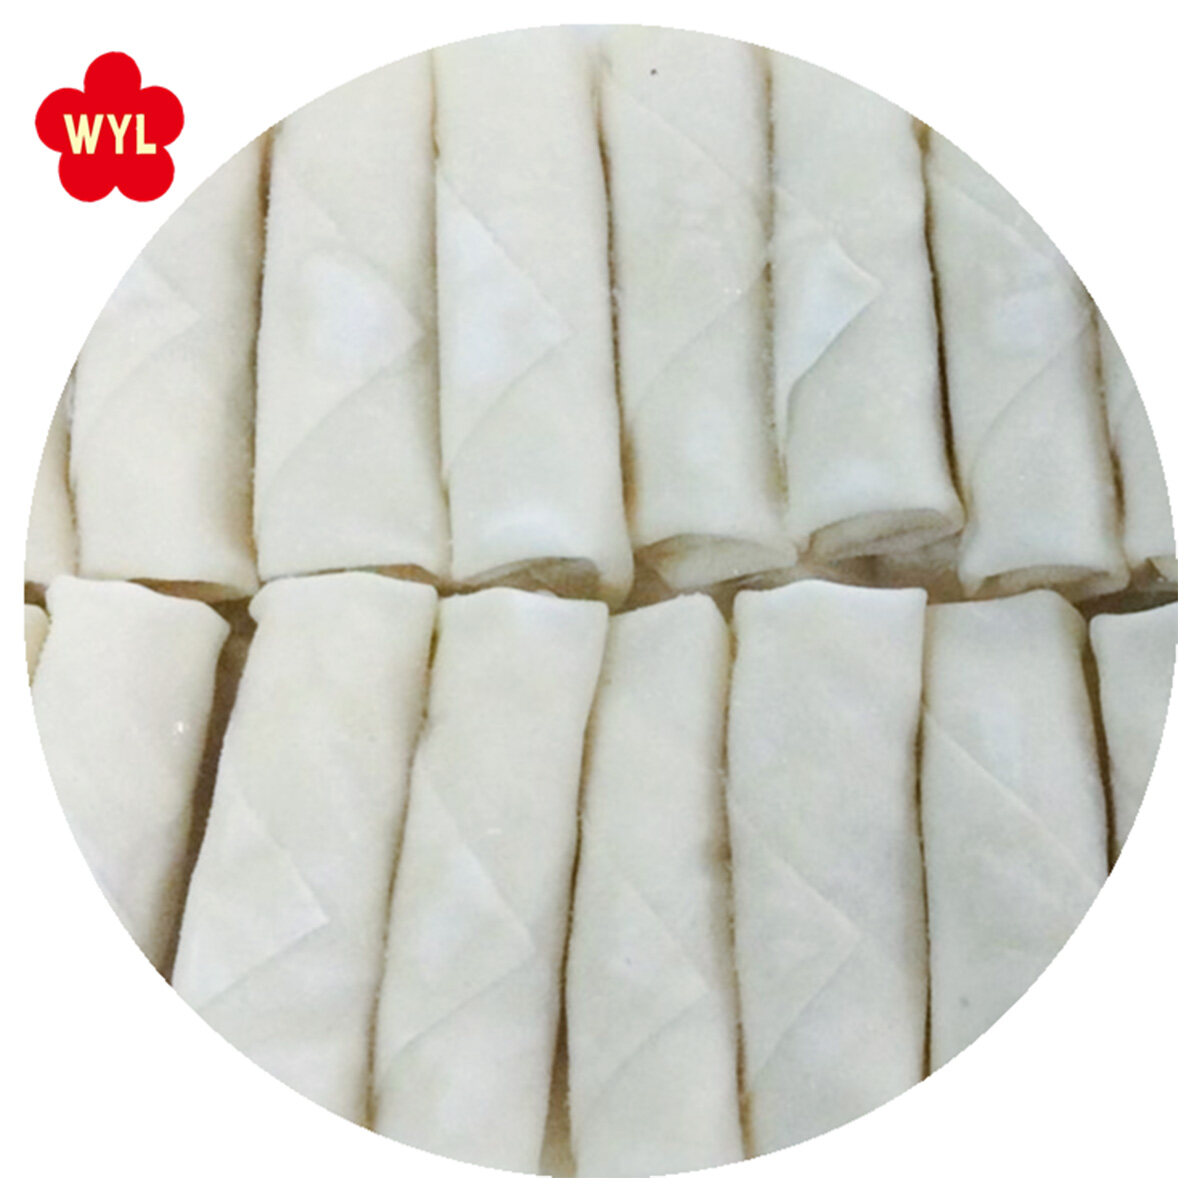 Wholesale vegetable spring rolls, folding spring roll Design, chinese frozen spring roll, mushroom spring roll Factory, qingdao spring rolls Sales